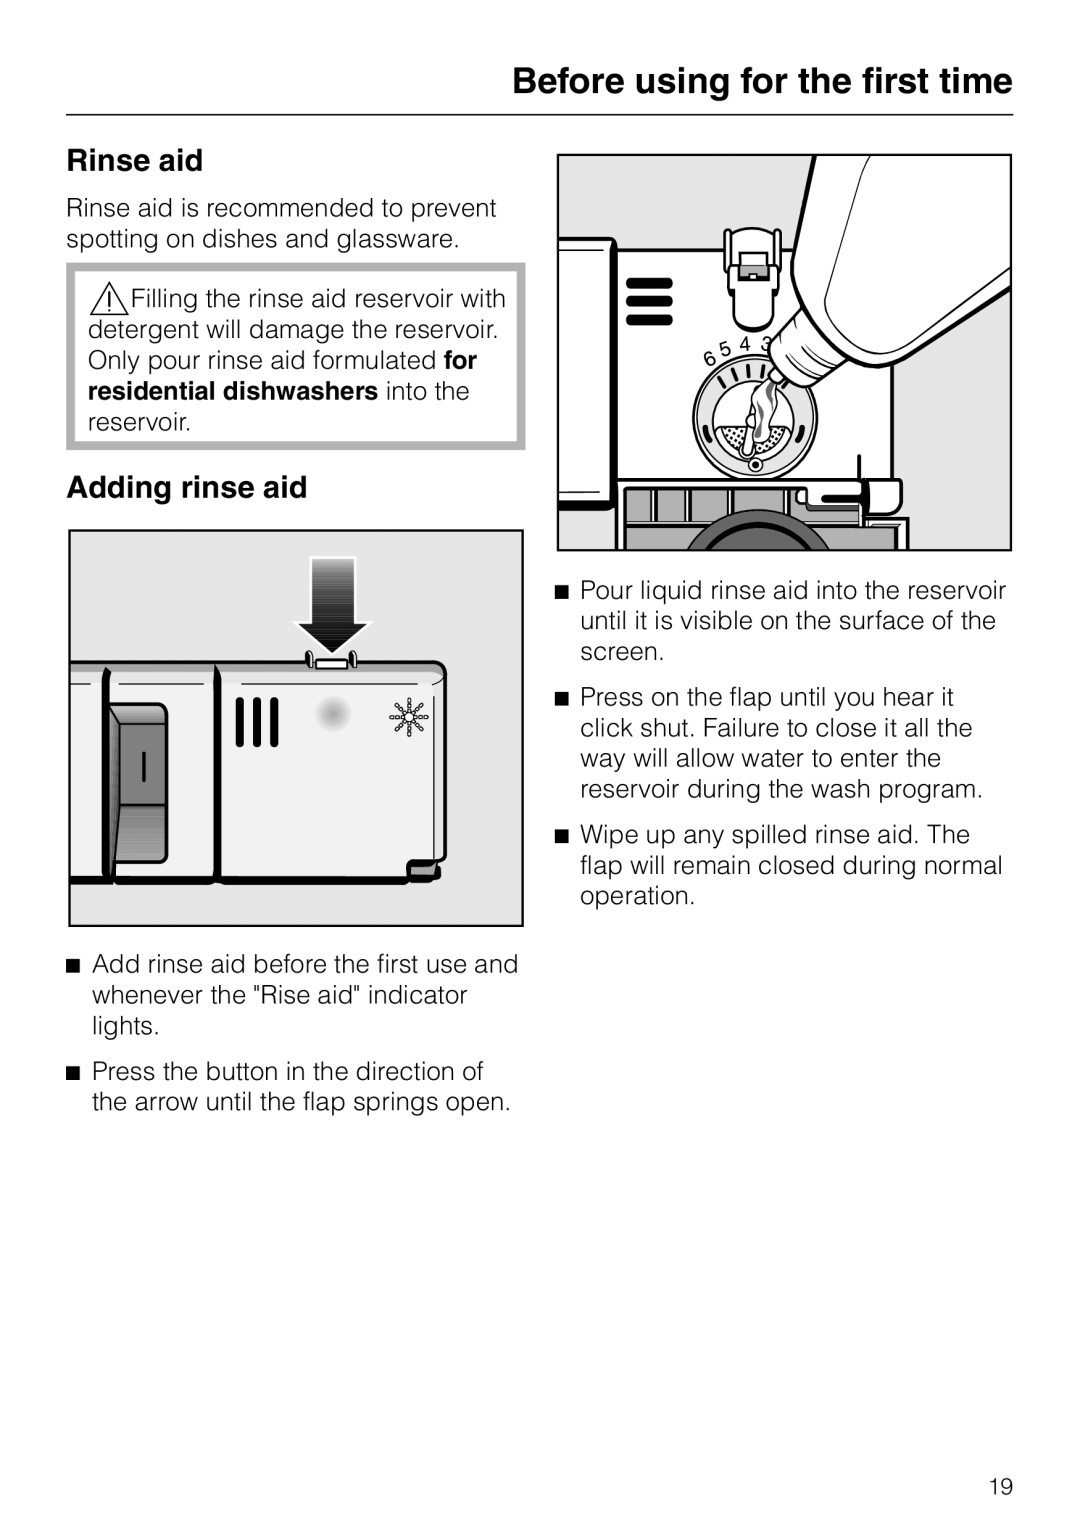 Miele G 818 SCVI operating instructions Rinse aid, Adding rinse aid, Before using for the first time 